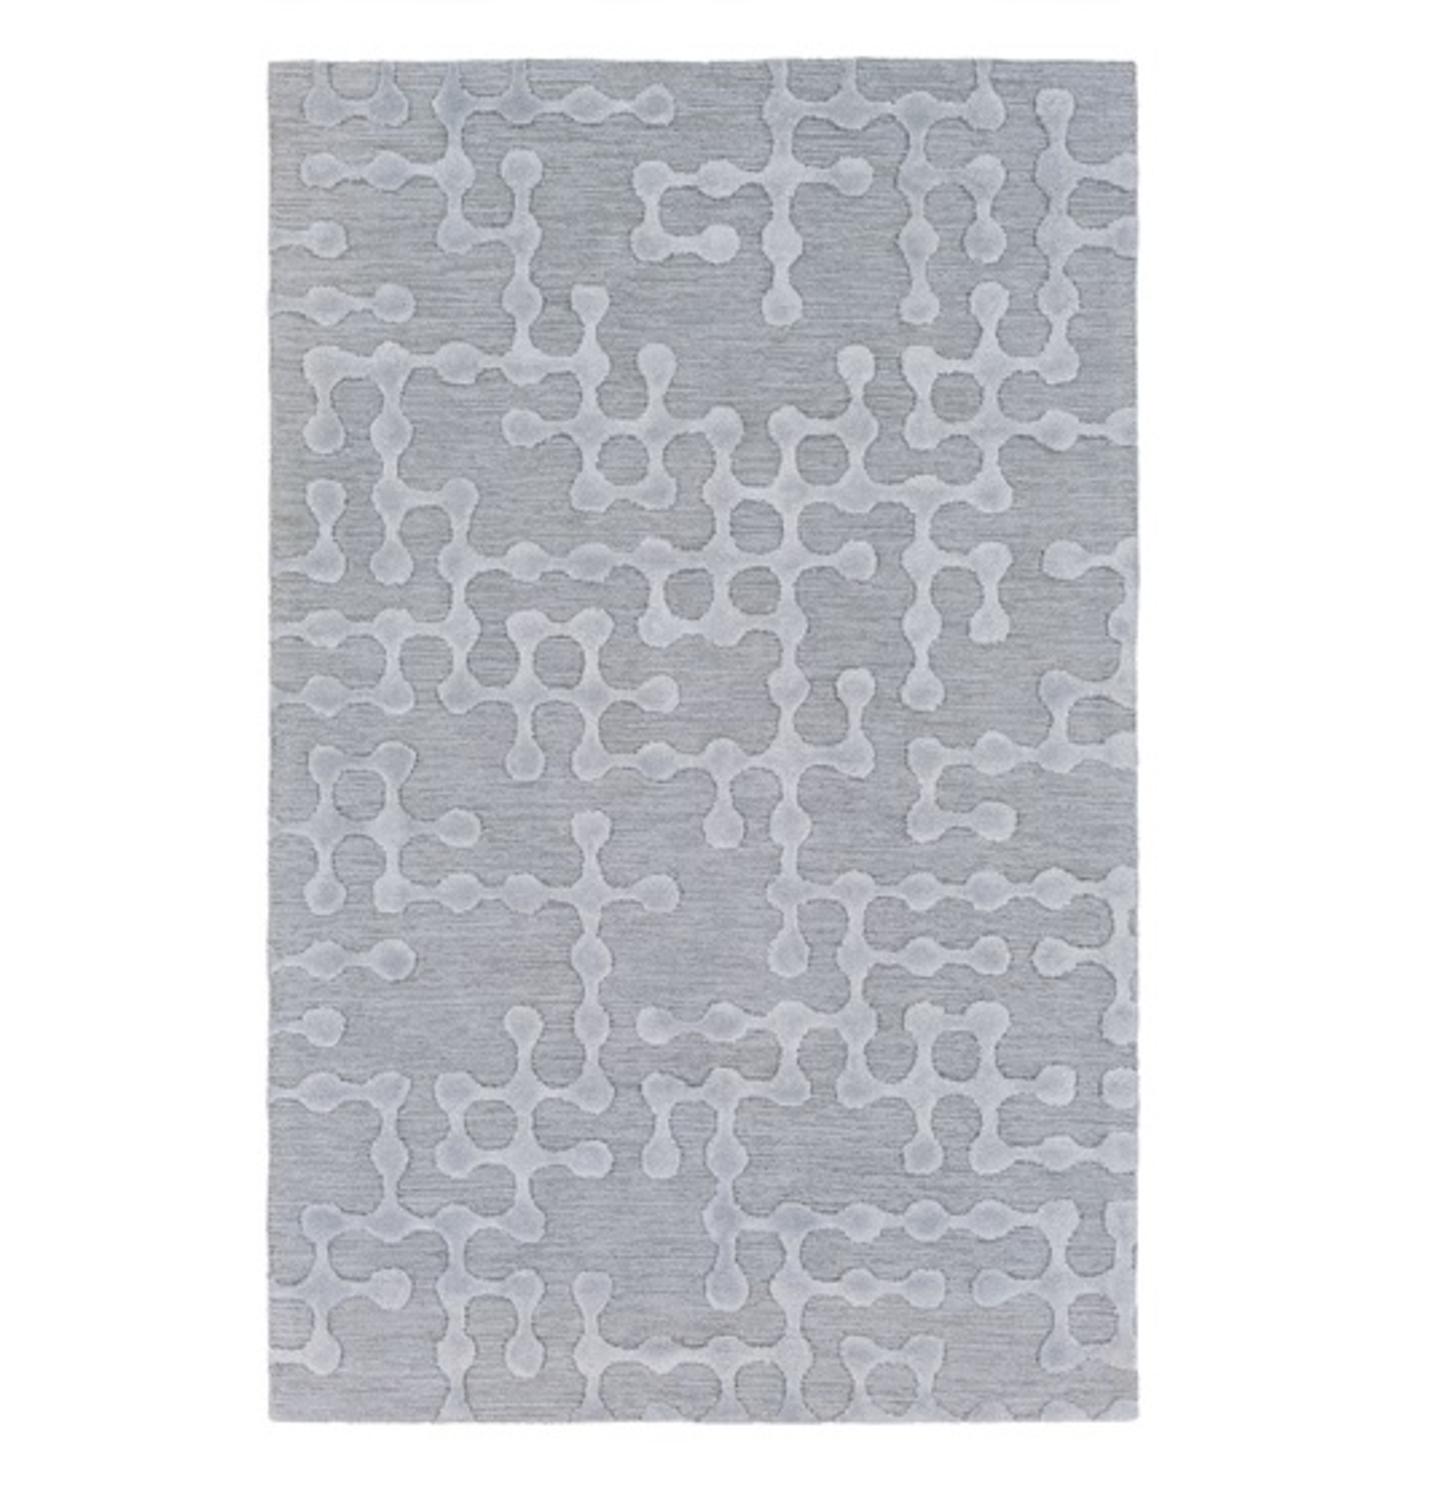 Diva At Home 8' x 10' Drizzled Plush Cadet Gray and Medium Silver Hand Hooked Area Throw Rug